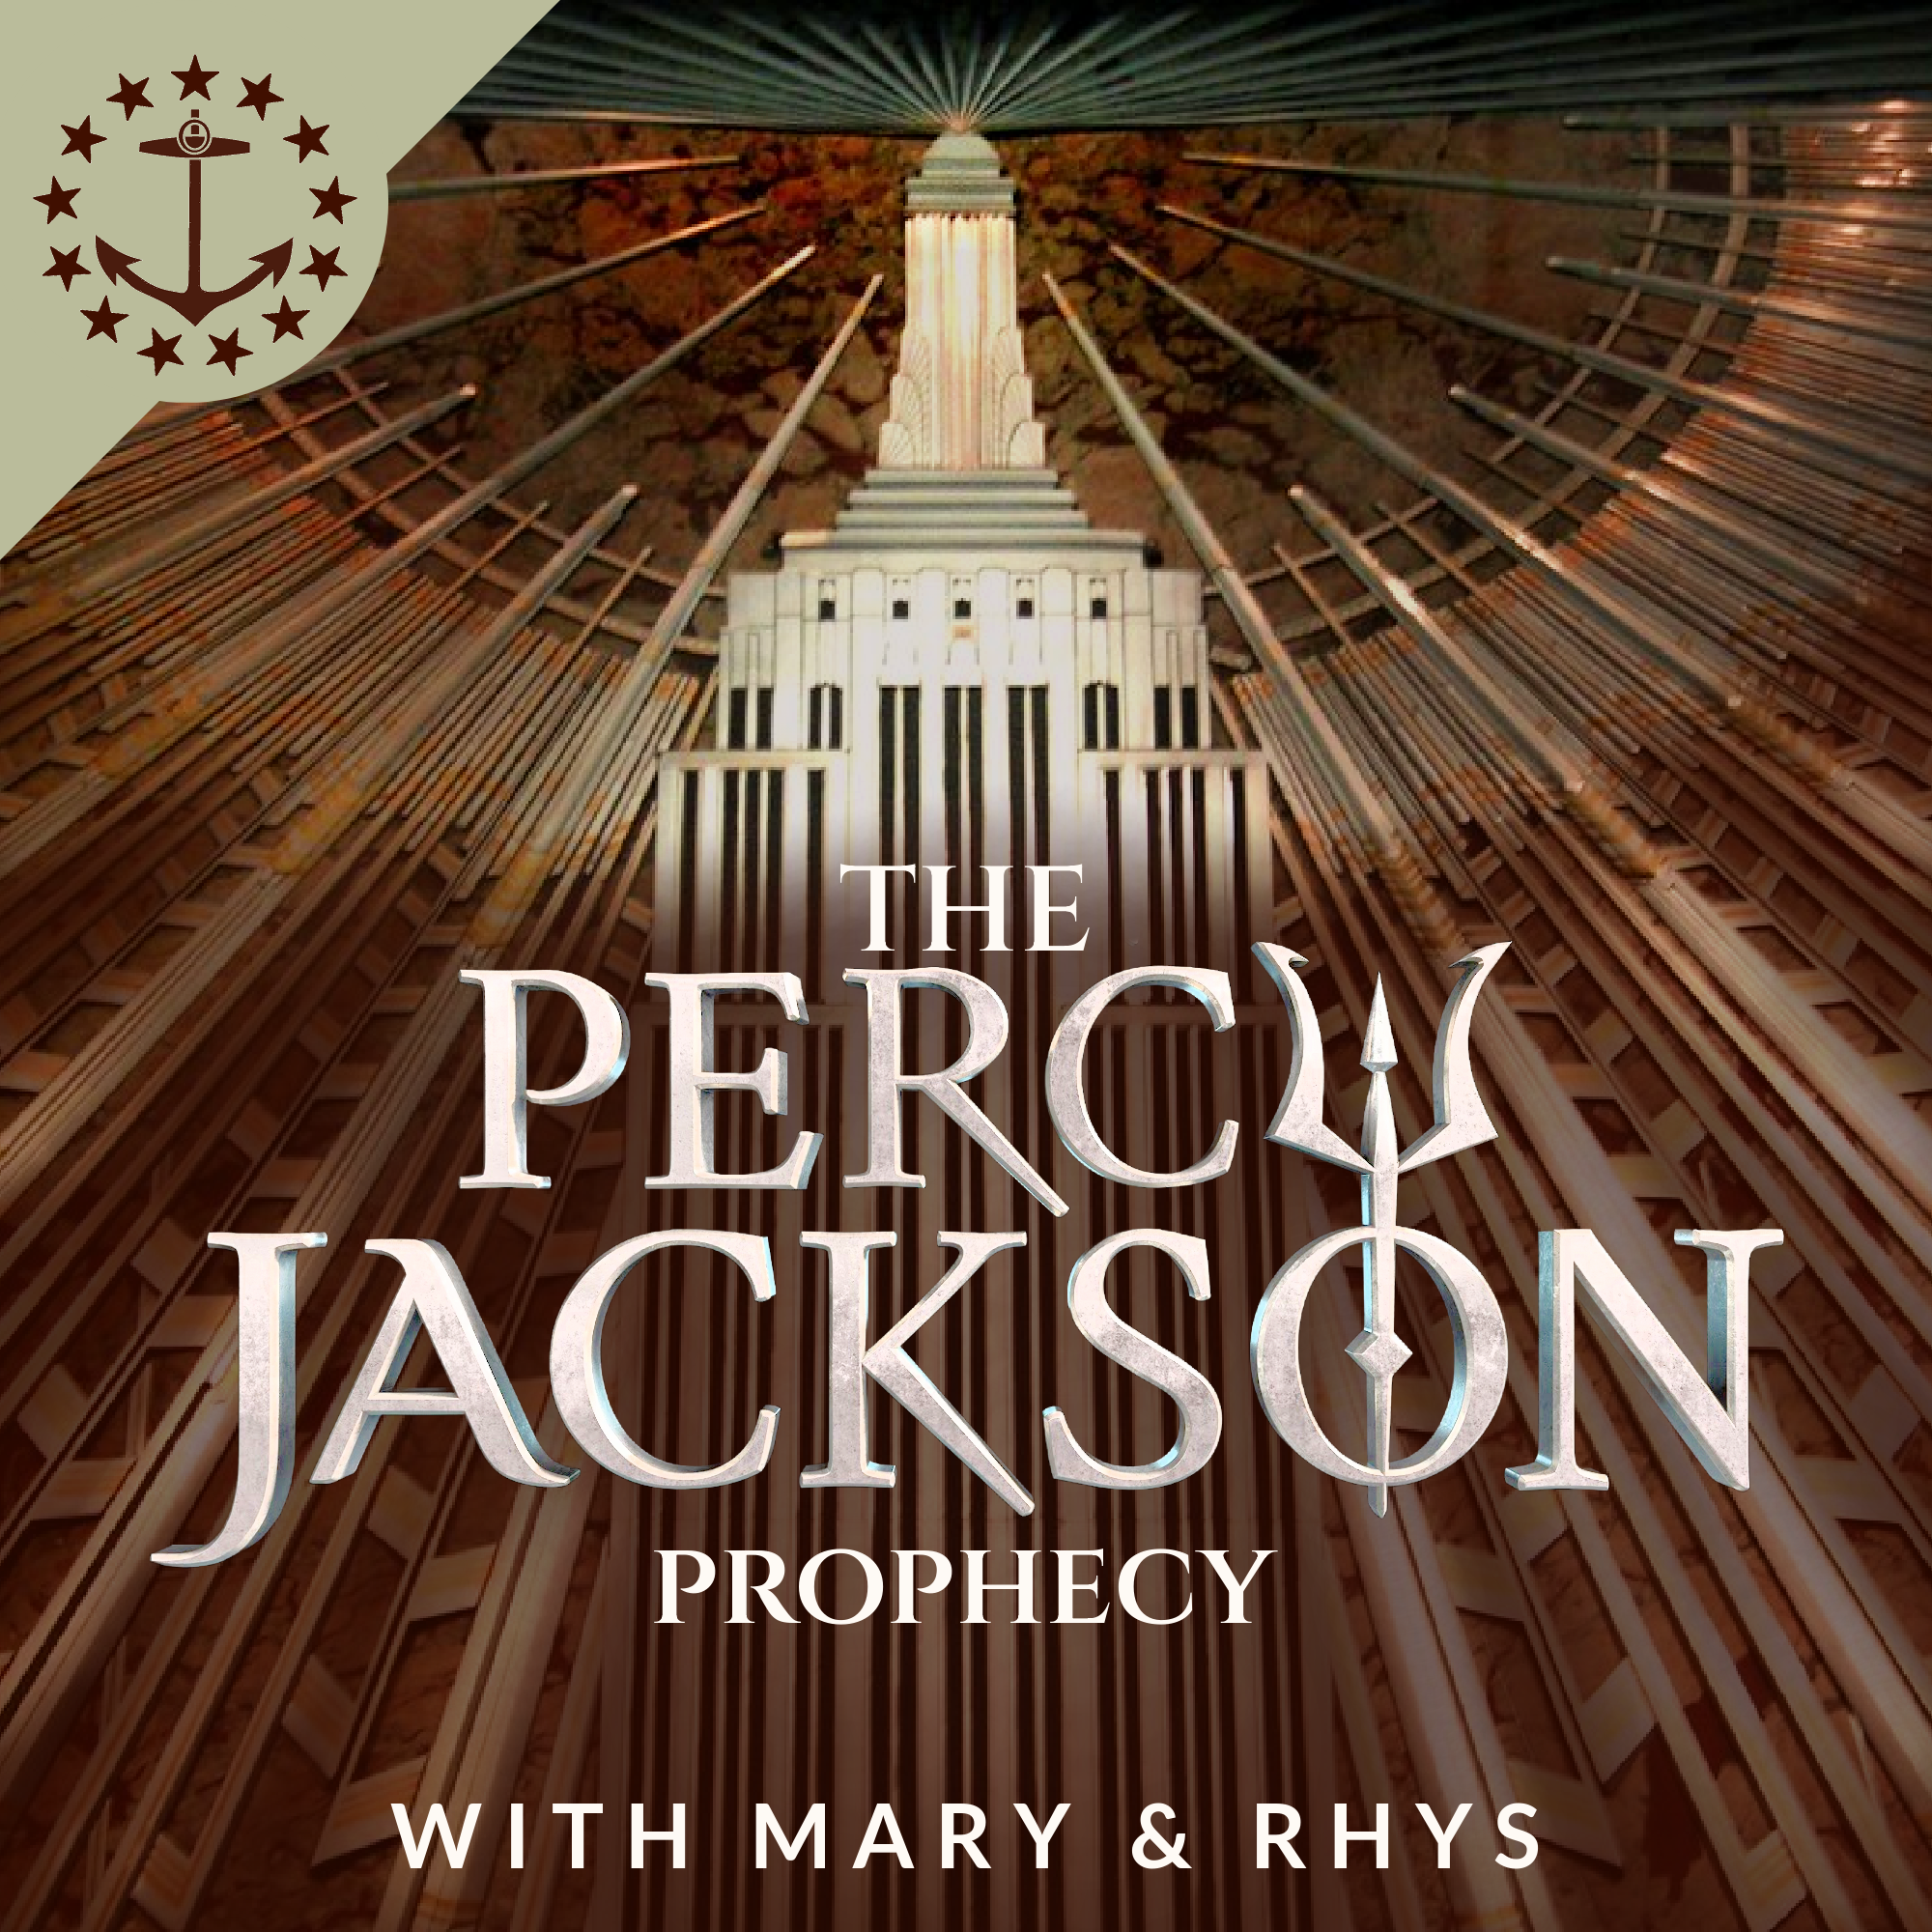 The Percy Jackson Prophecy With Mary & Rhys: A Percy Jackson Podcast artwork